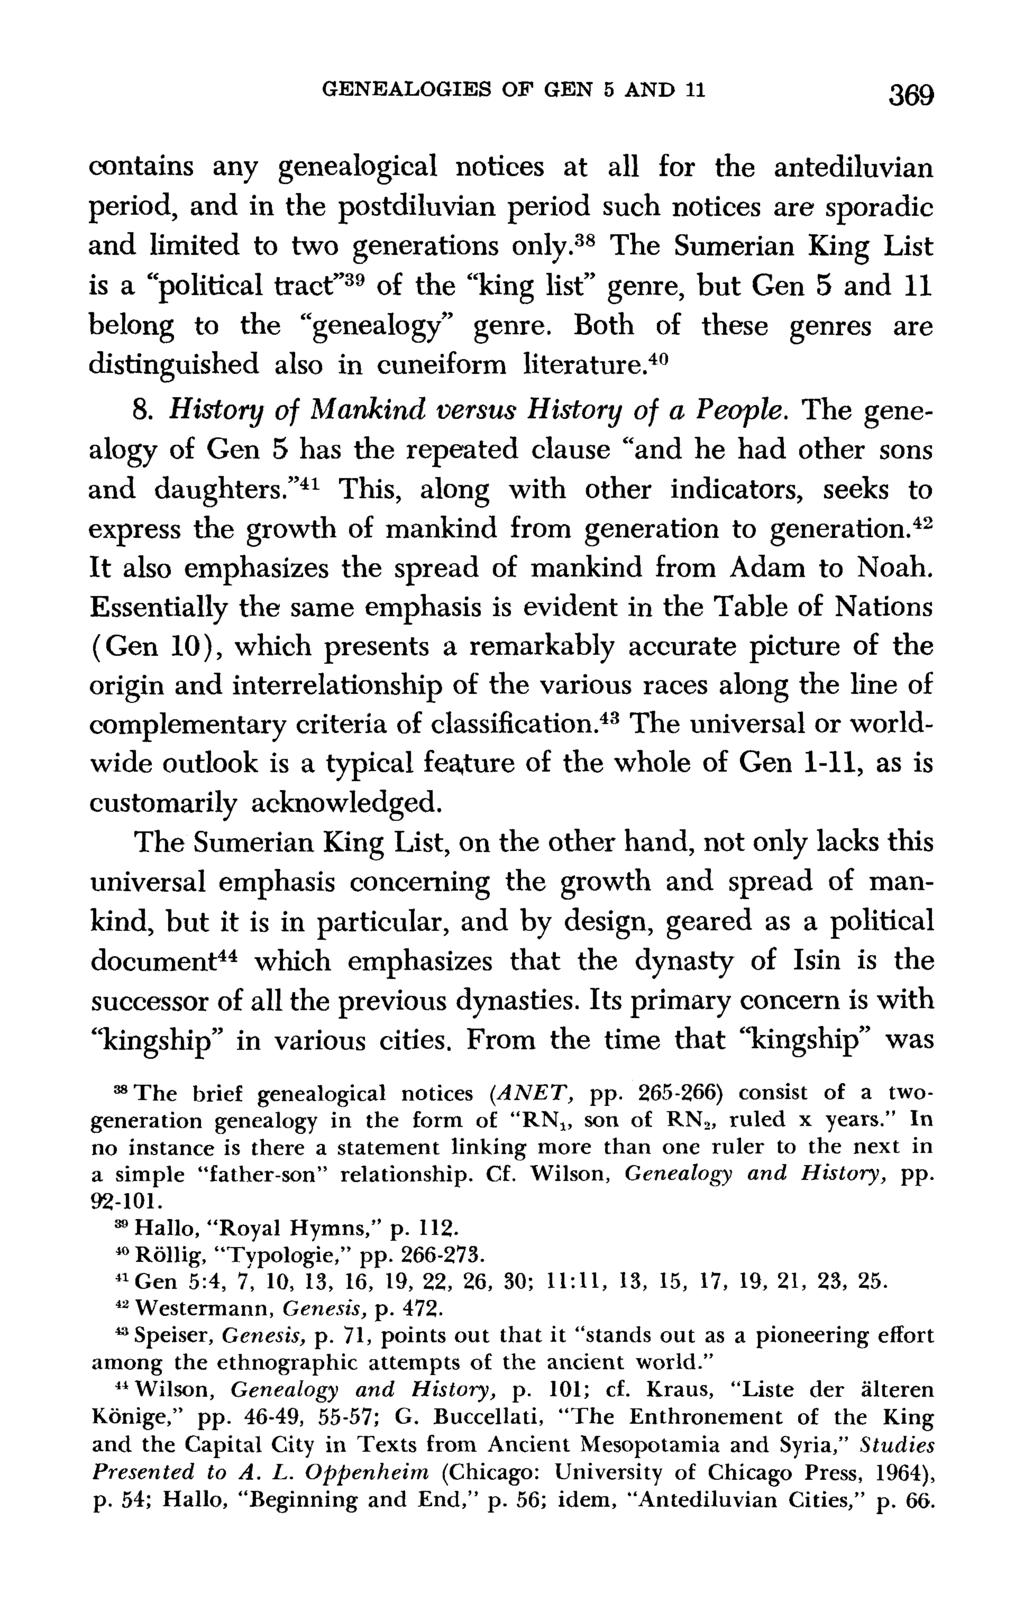 GENEALOGIES OF GEN 5 AND 11 369 contains any genealogical notices at all for the antediluvian period, and in the postdiluvian period such notices are sporadic and limited to two generations only.